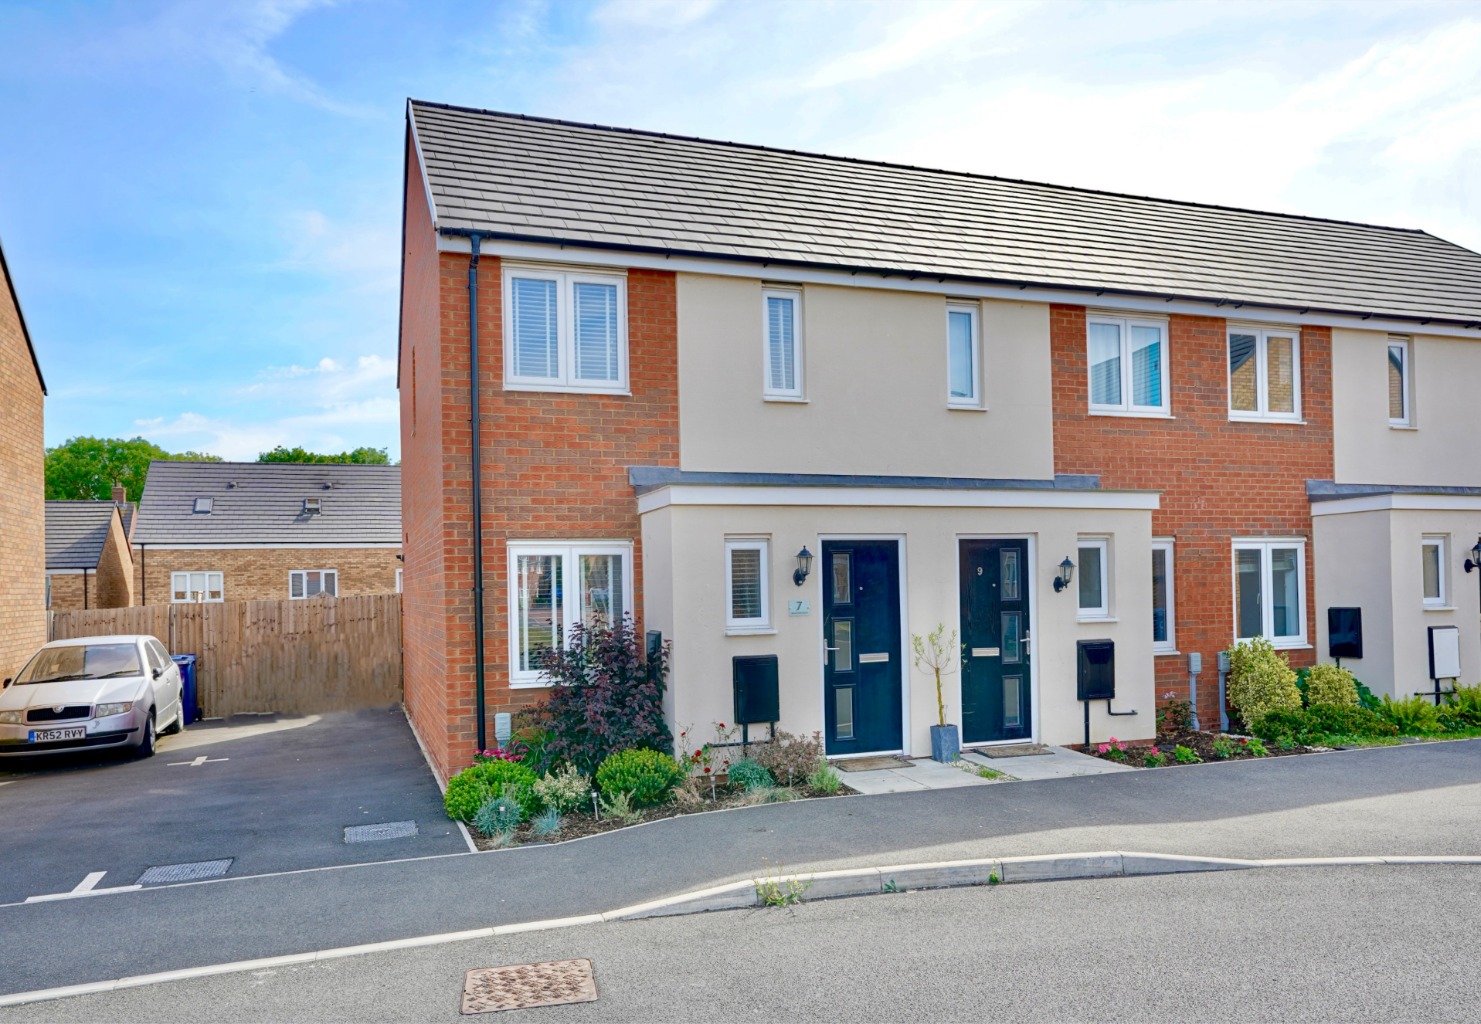 2 bed end of terrace house for sale in Bloomfield Way, Huntingdon - Property Image 1